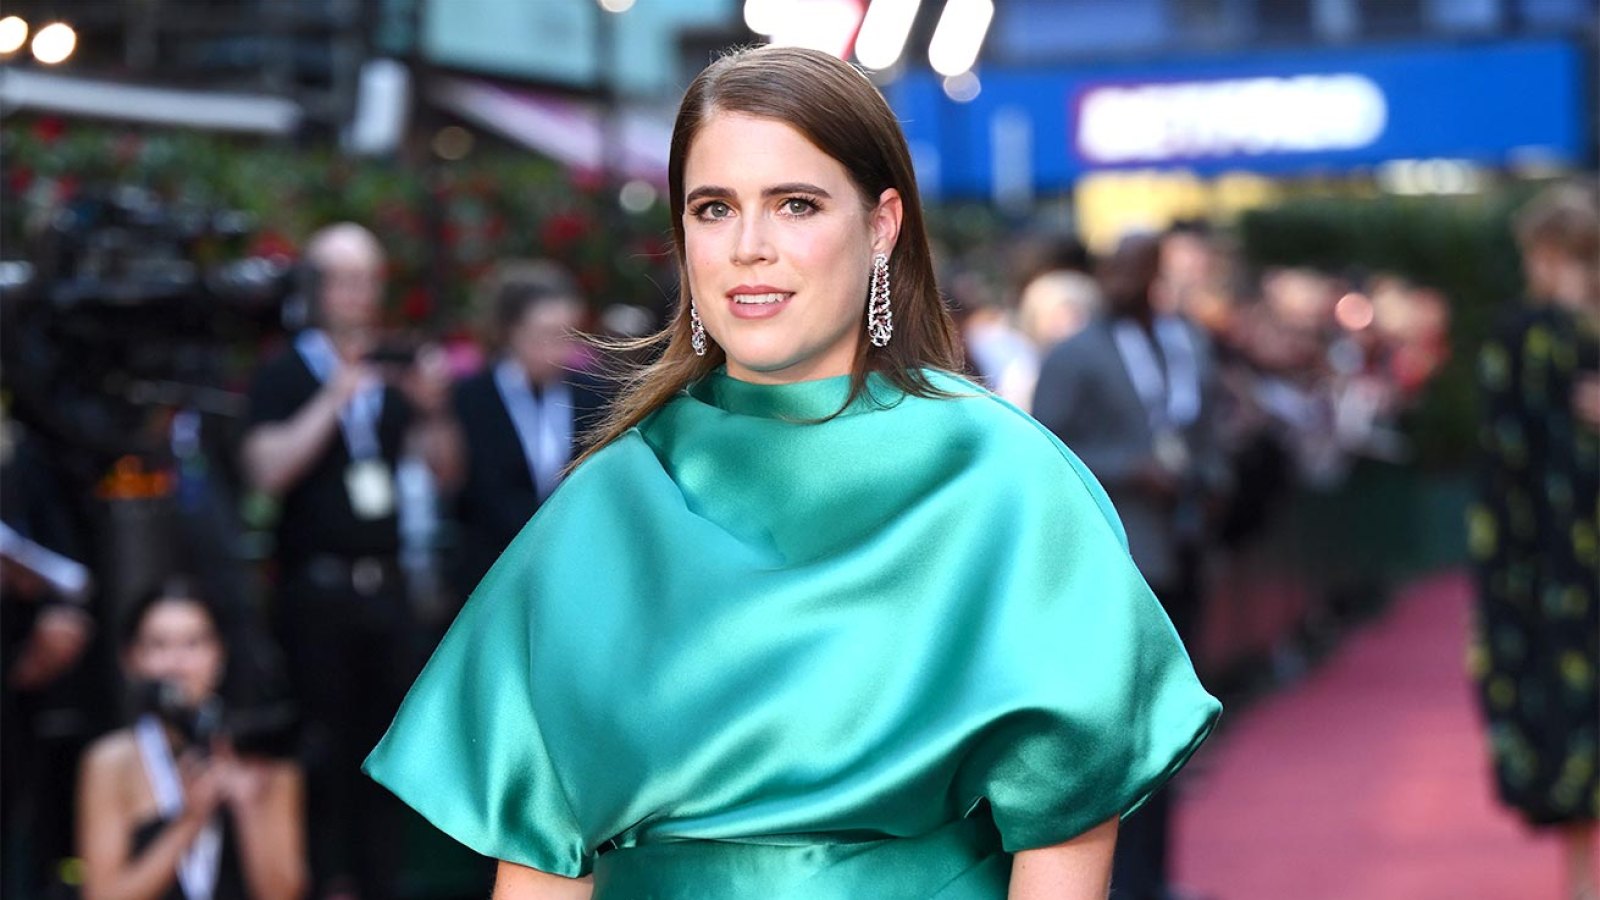 Princess Eugenie Details the Multi-Step Way Takeout Food Is Delivered at Kensington Palace